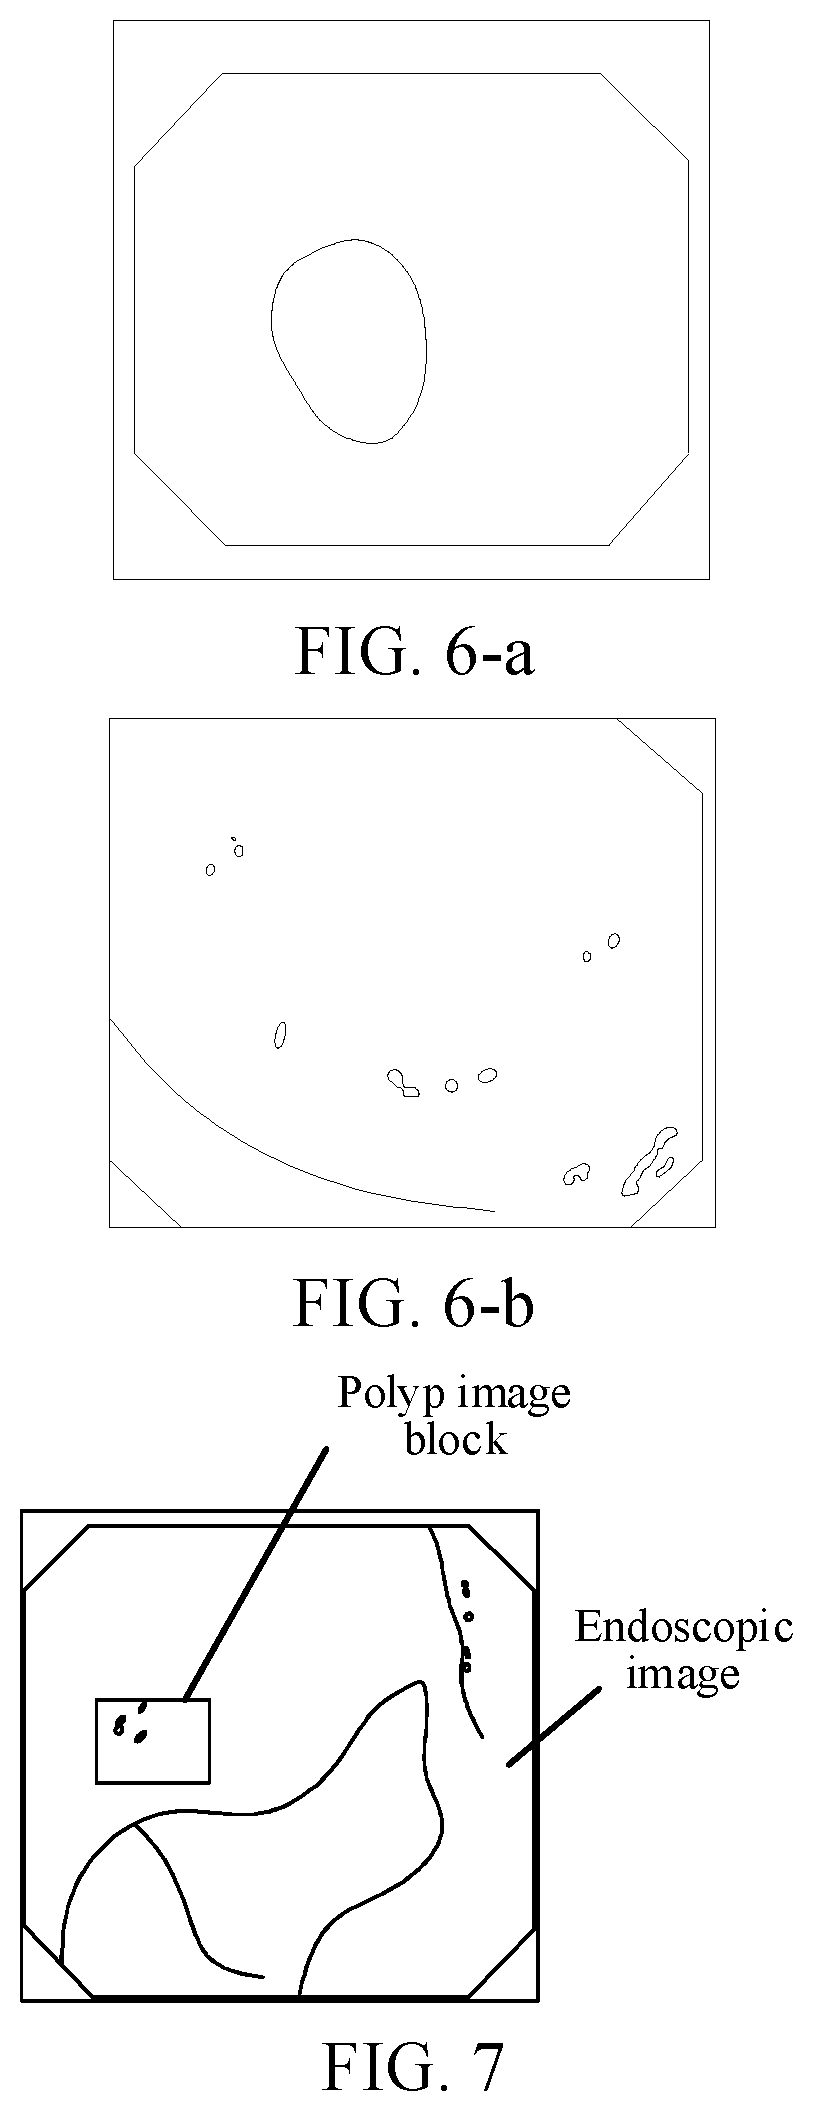 Colon polyp image processing method and apparatus, and system